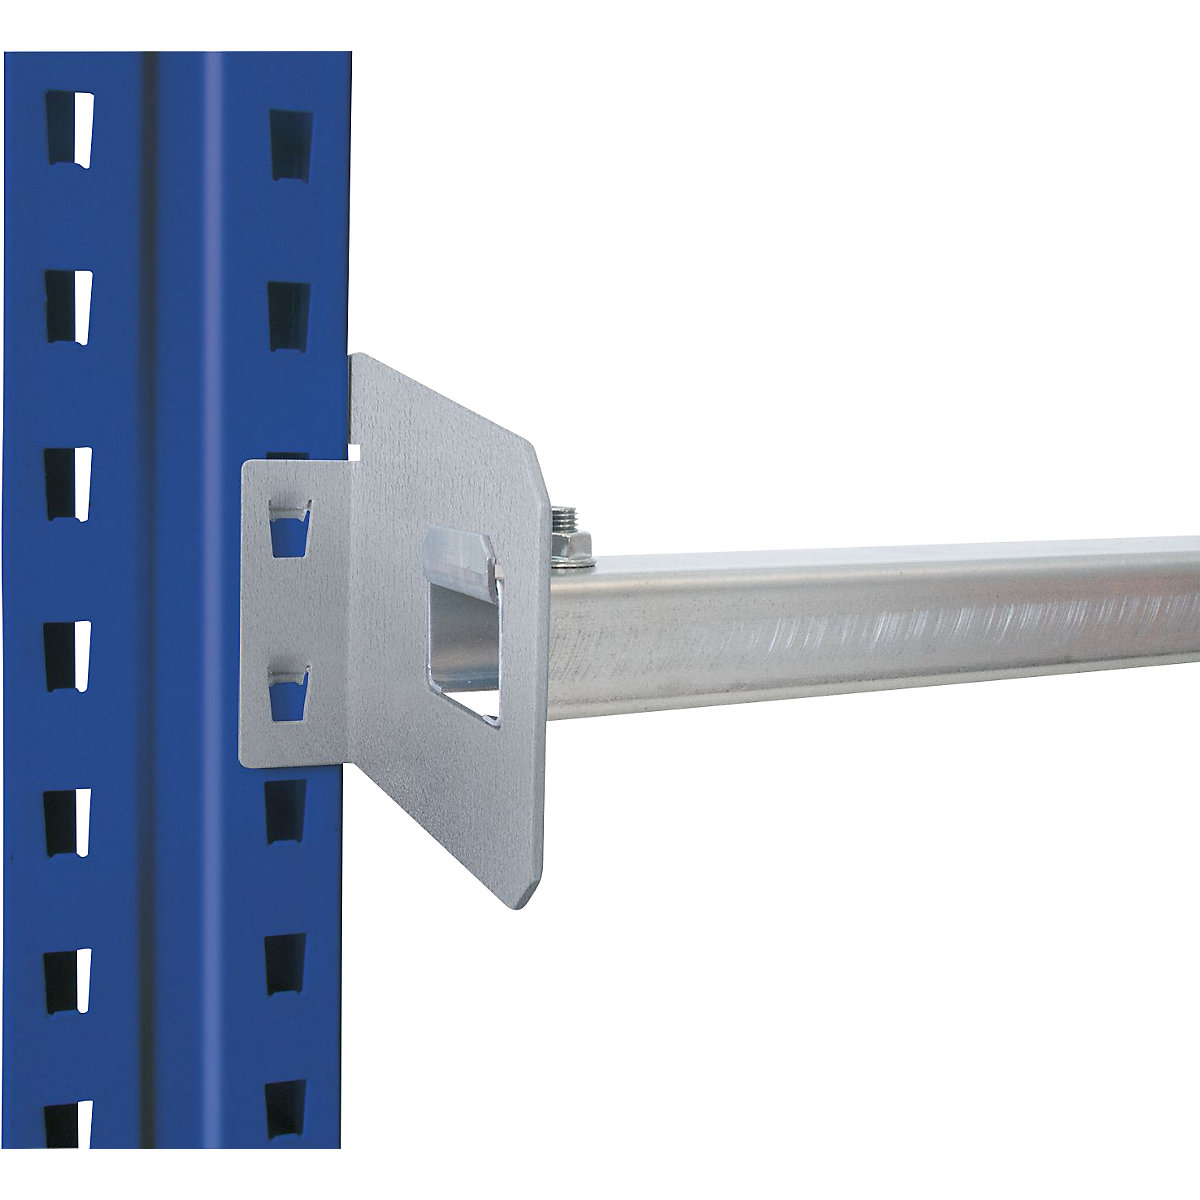 Push-through stop, incl. mounting materials – SCHULTE